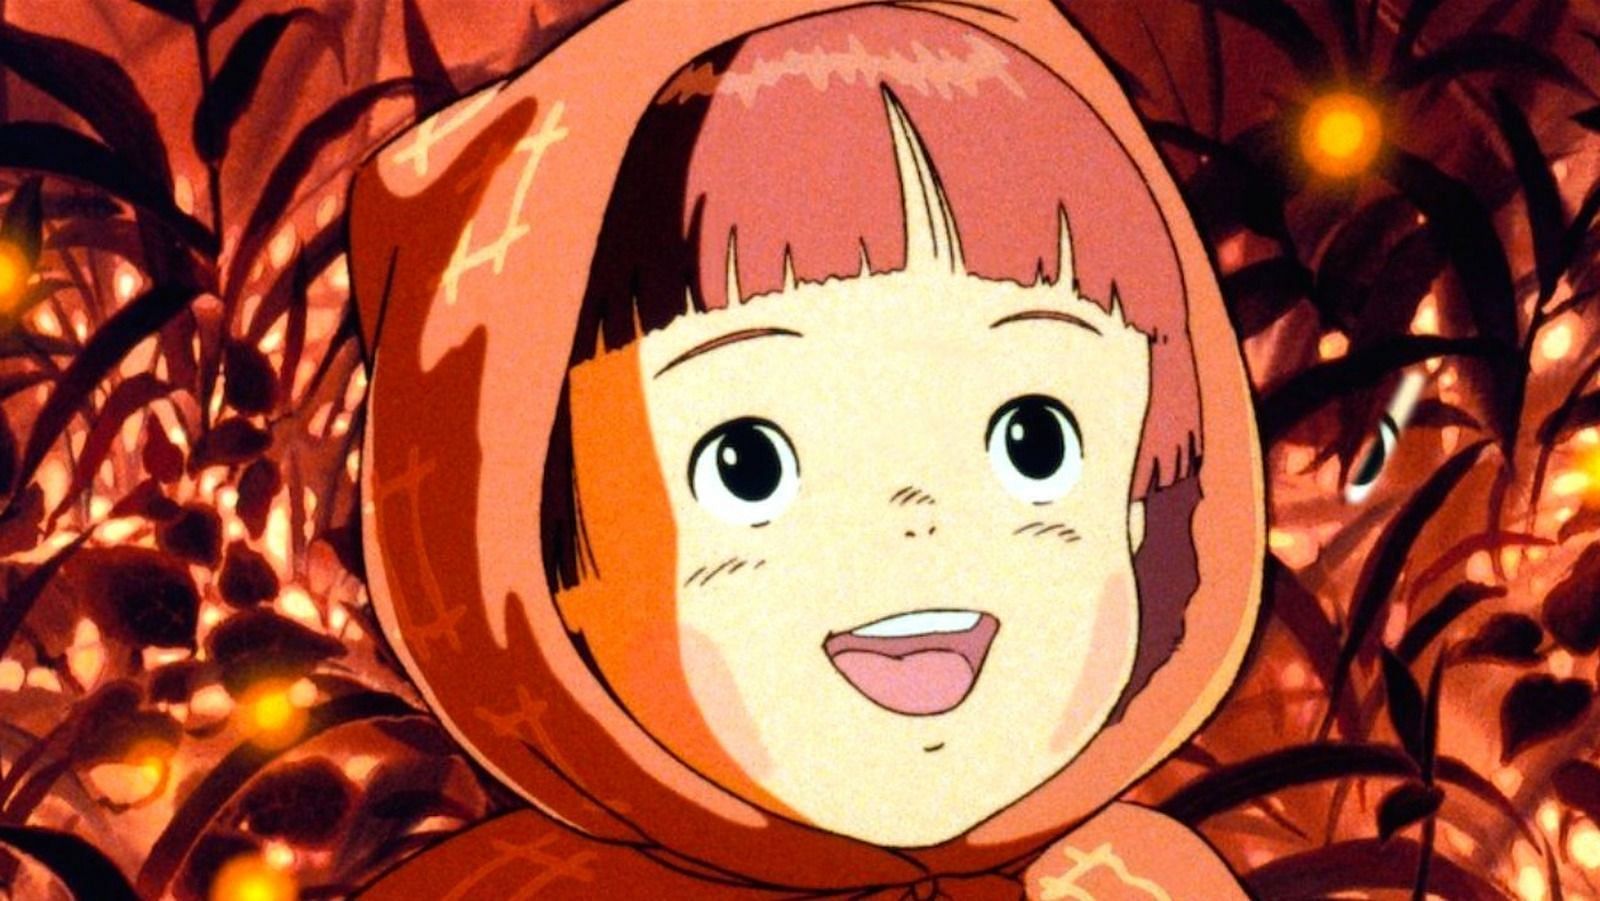 Top 10 anime movies of all time, according to IMDb ratings